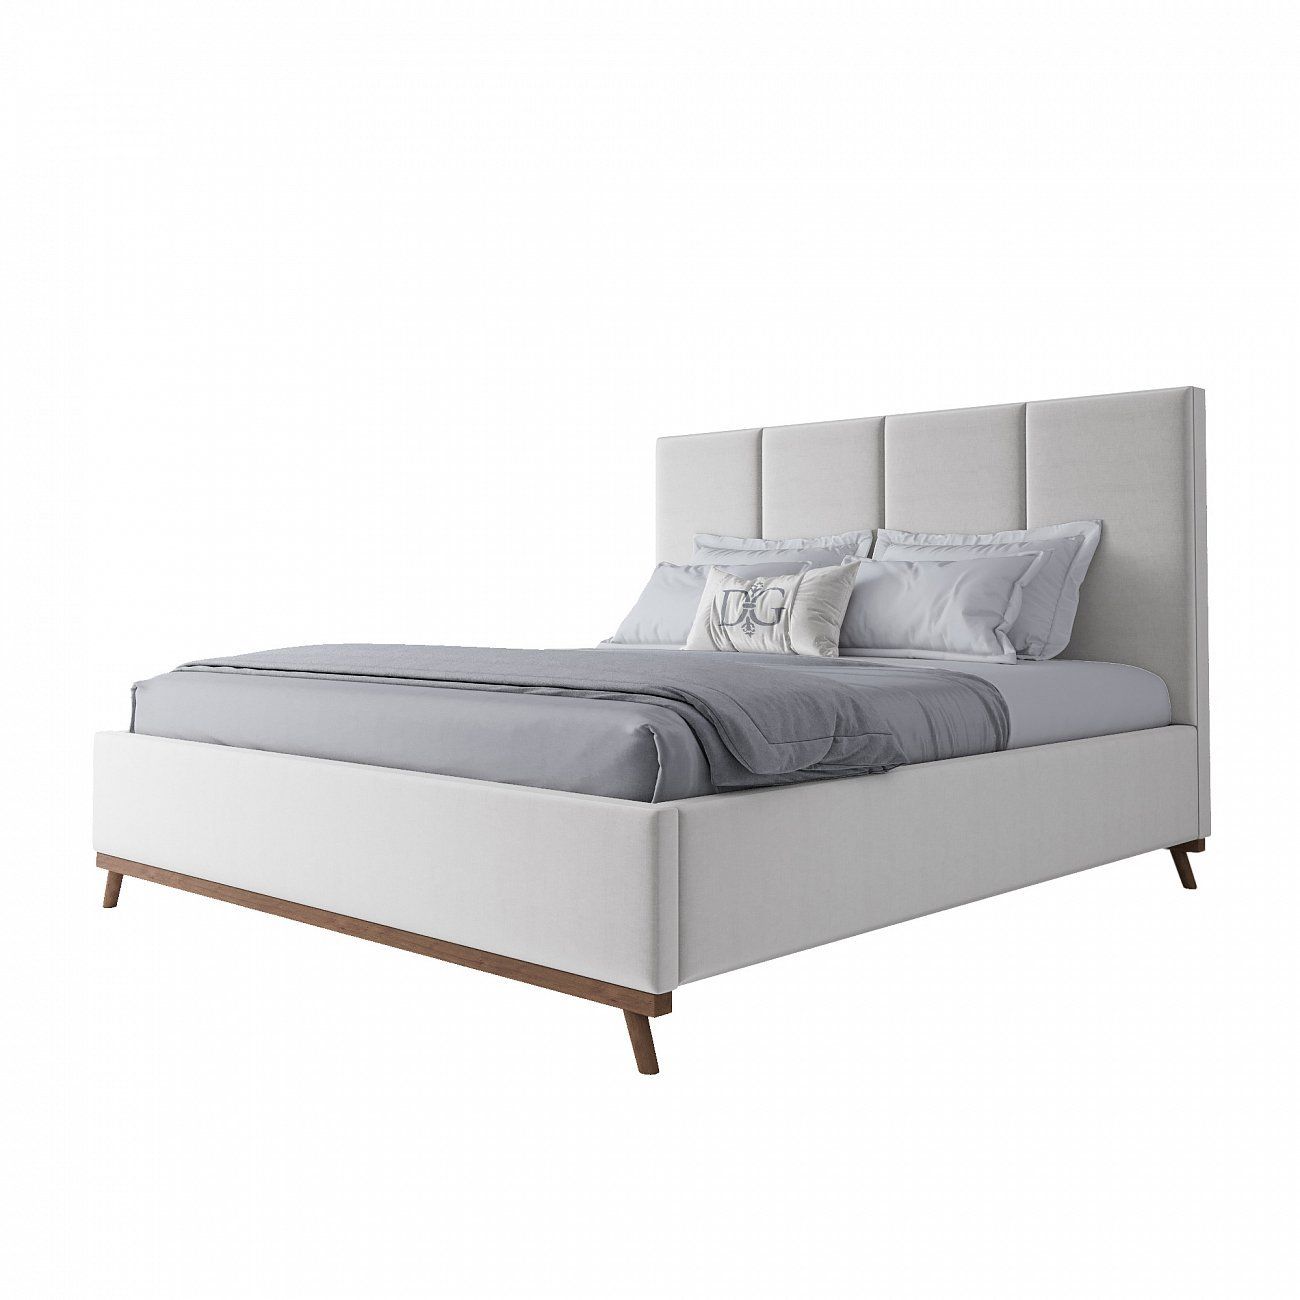 Double bed 180x200 white Carter Snowfall